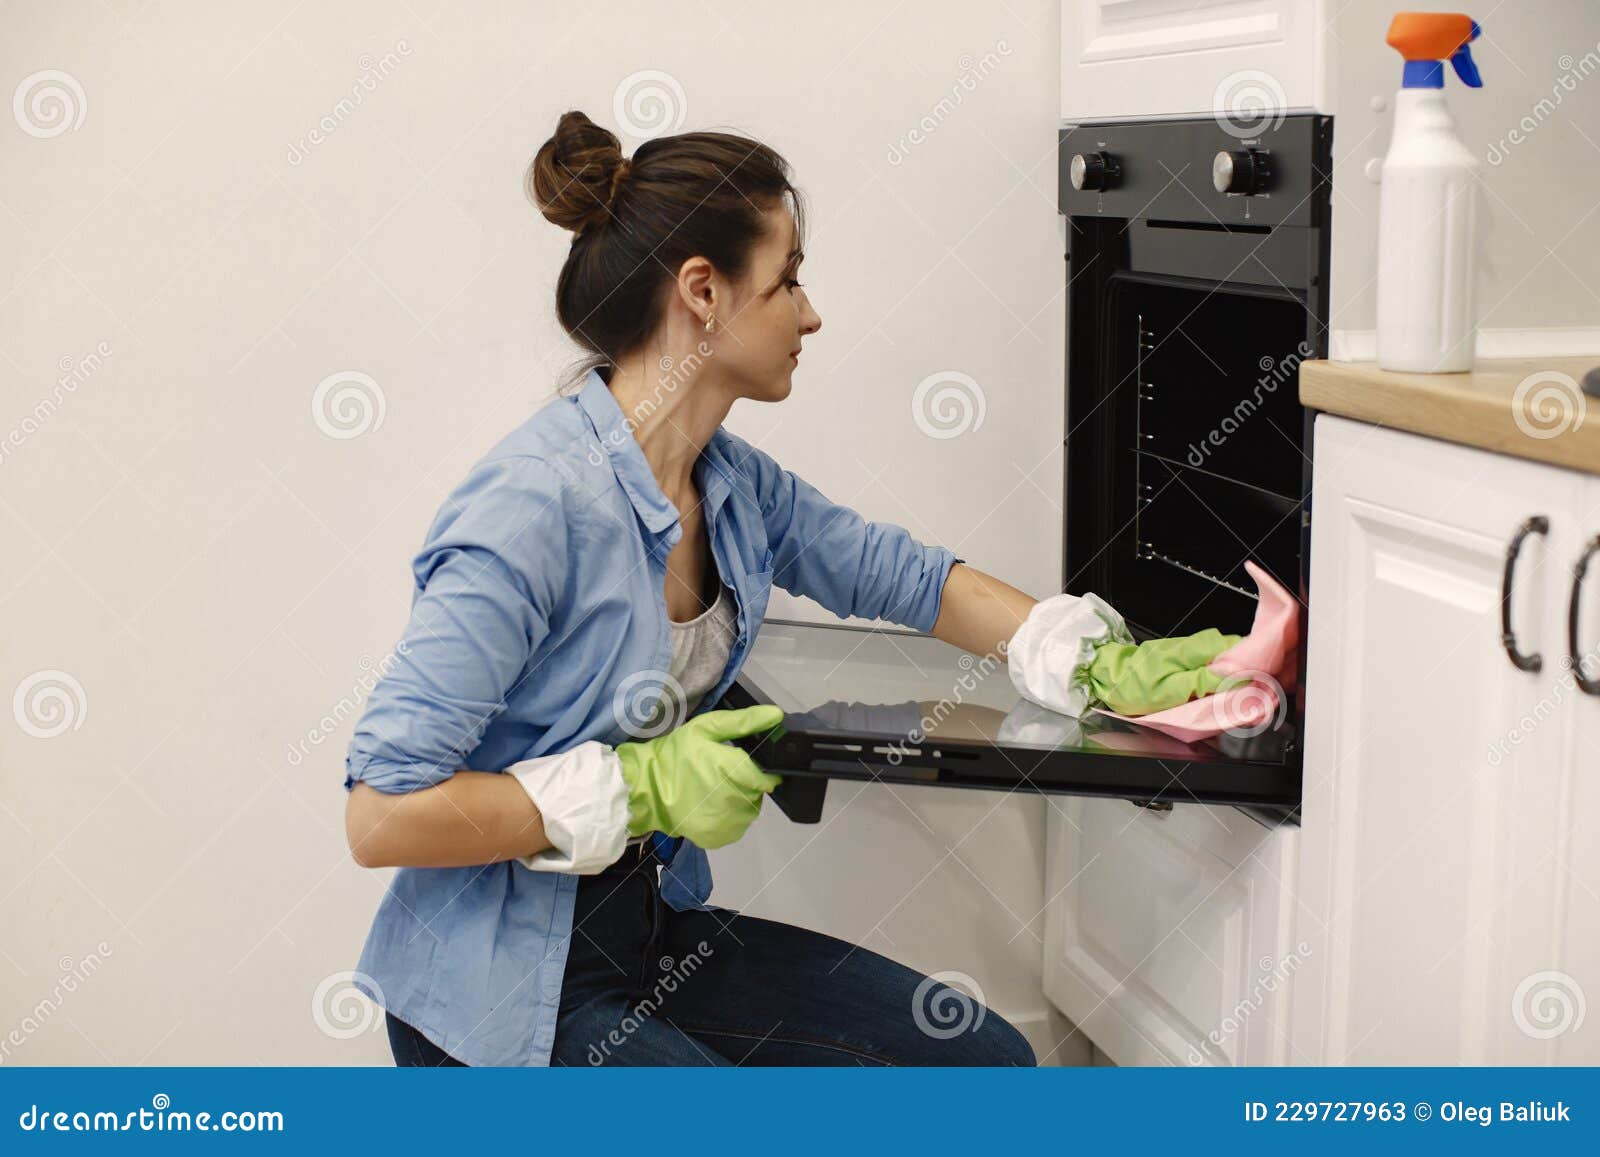 Woman with Sponge and Rubber Gloves Cleaning House Stock Image - Image of  hygiene, dust: 229727963